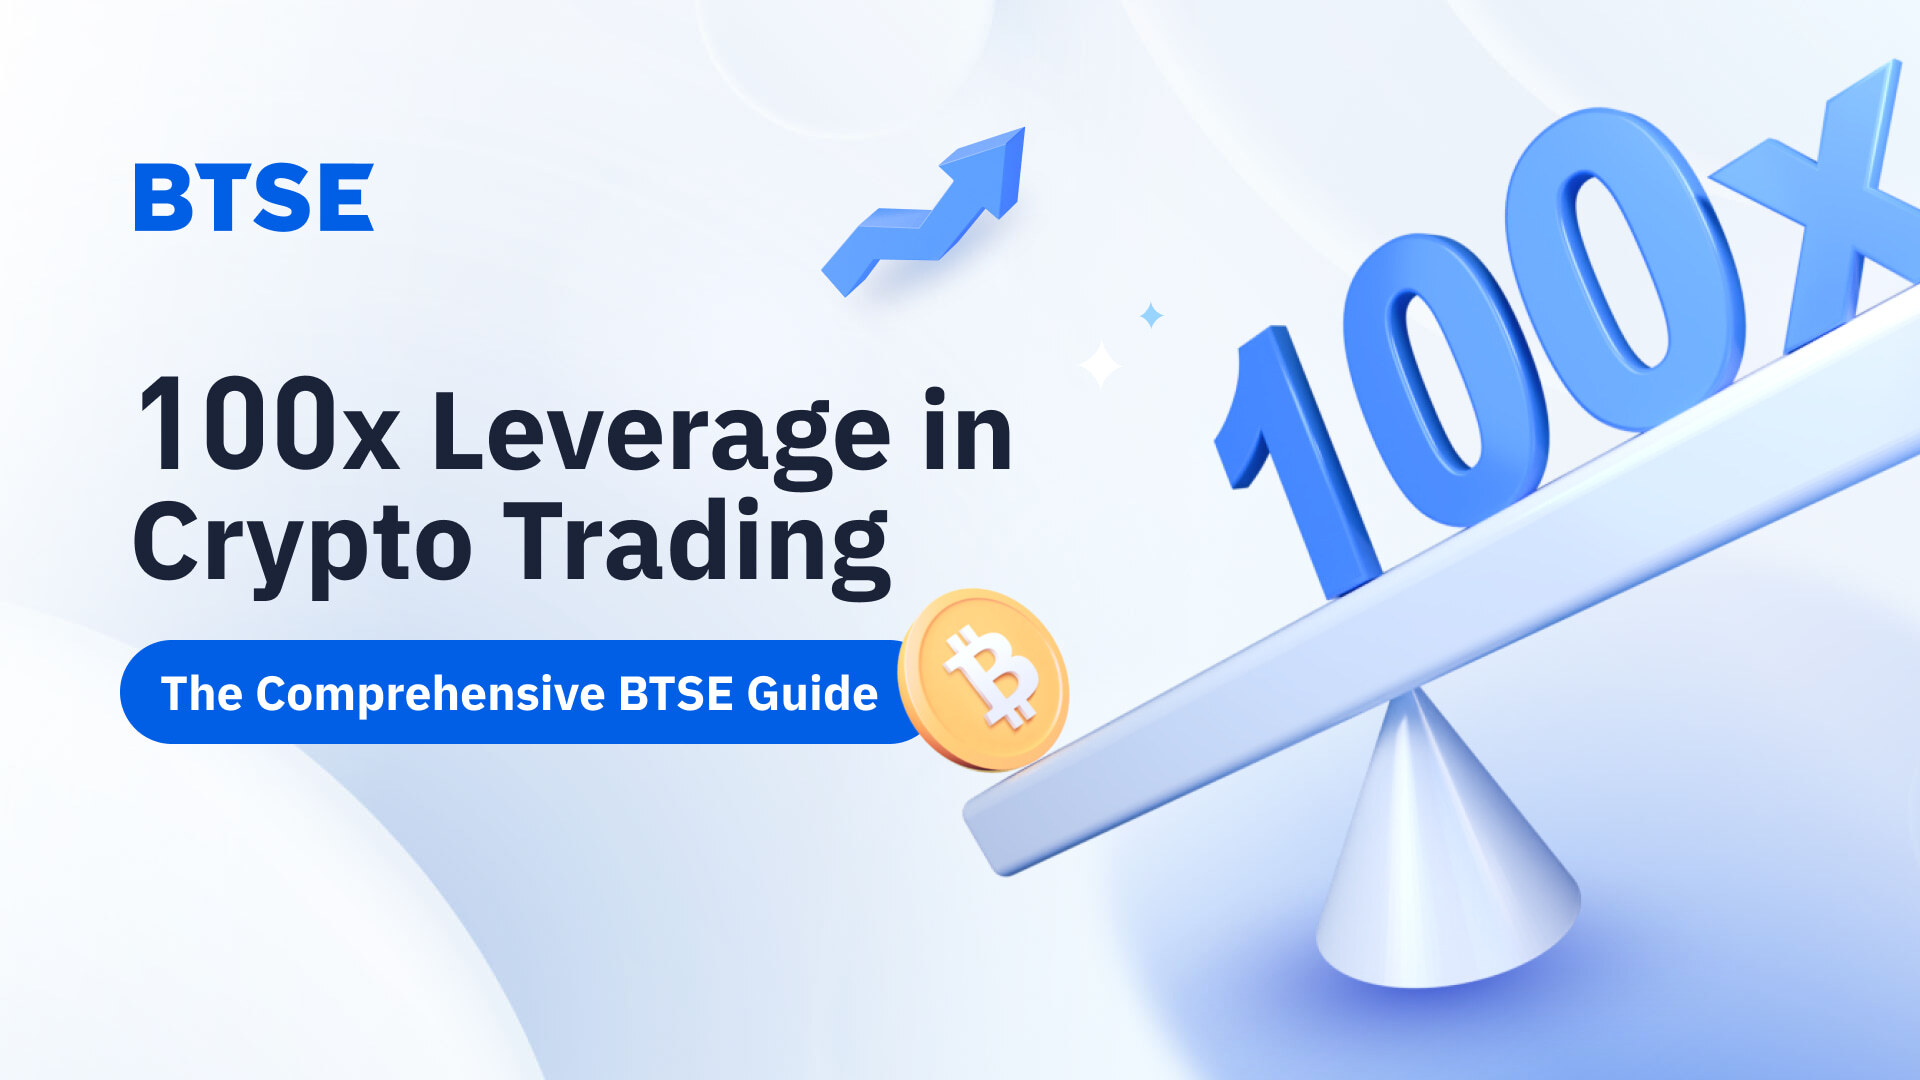 Understanding the Leverage Trading From DeFi Lending and Borrowing